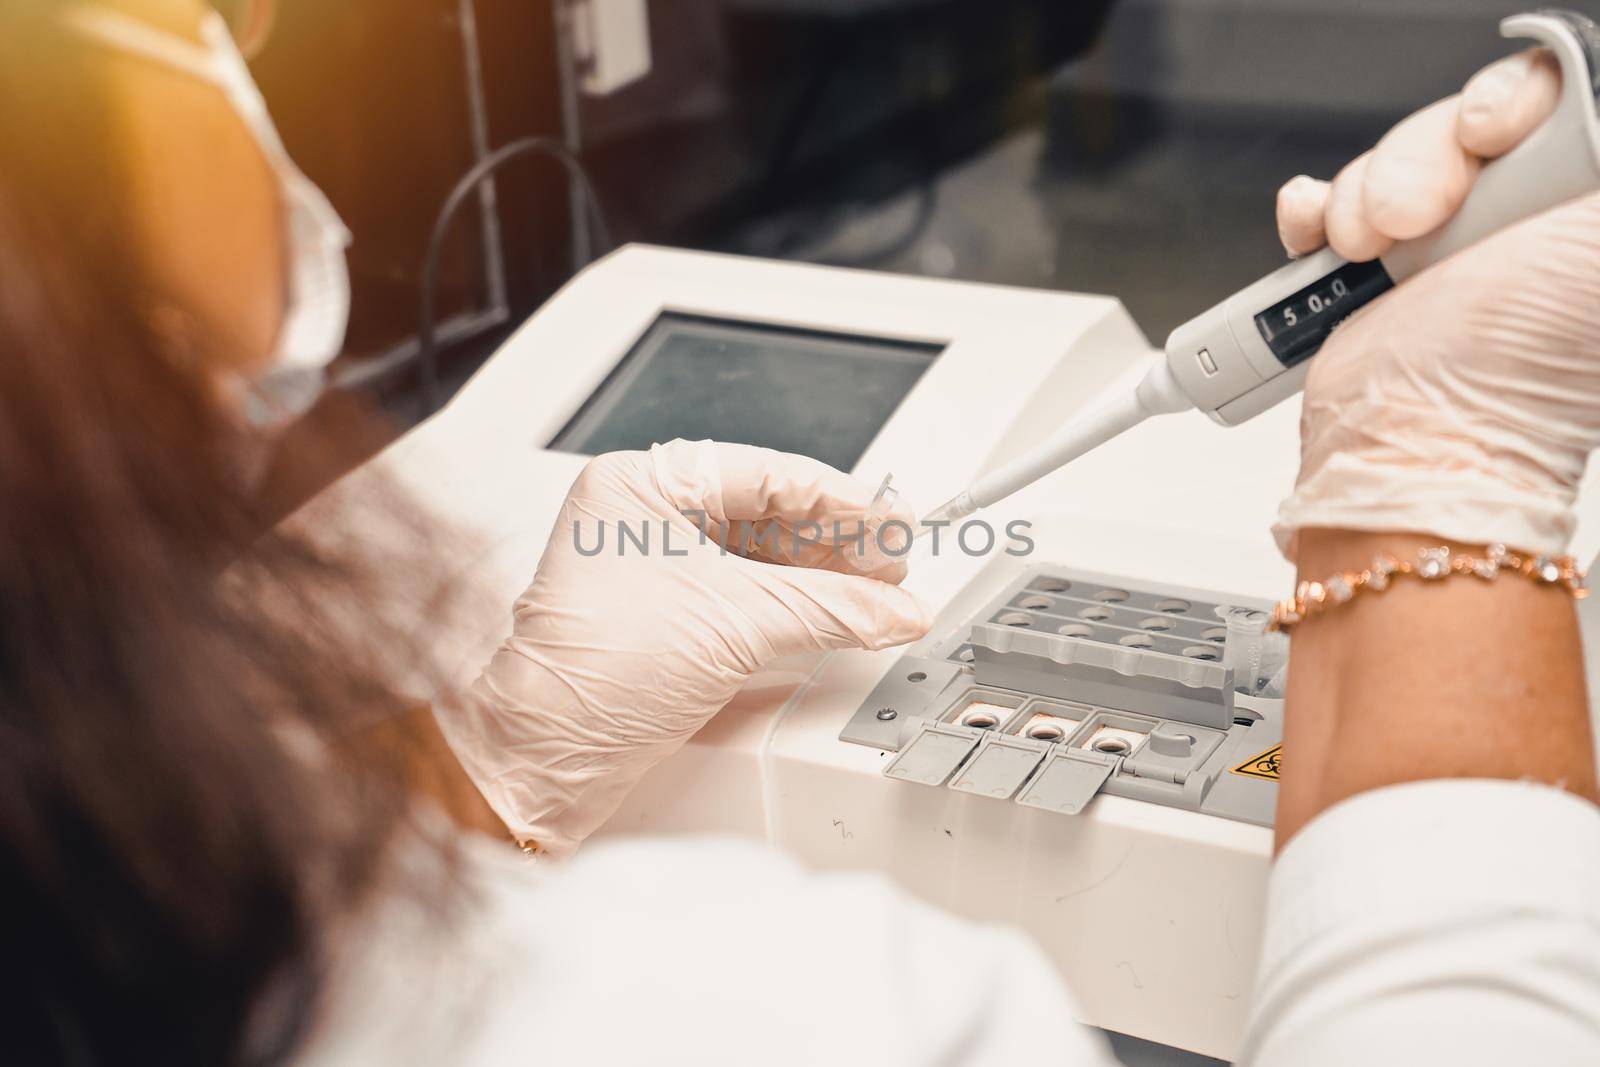 Latin clinical analyst testing medical blood sample in a hospital laboratory